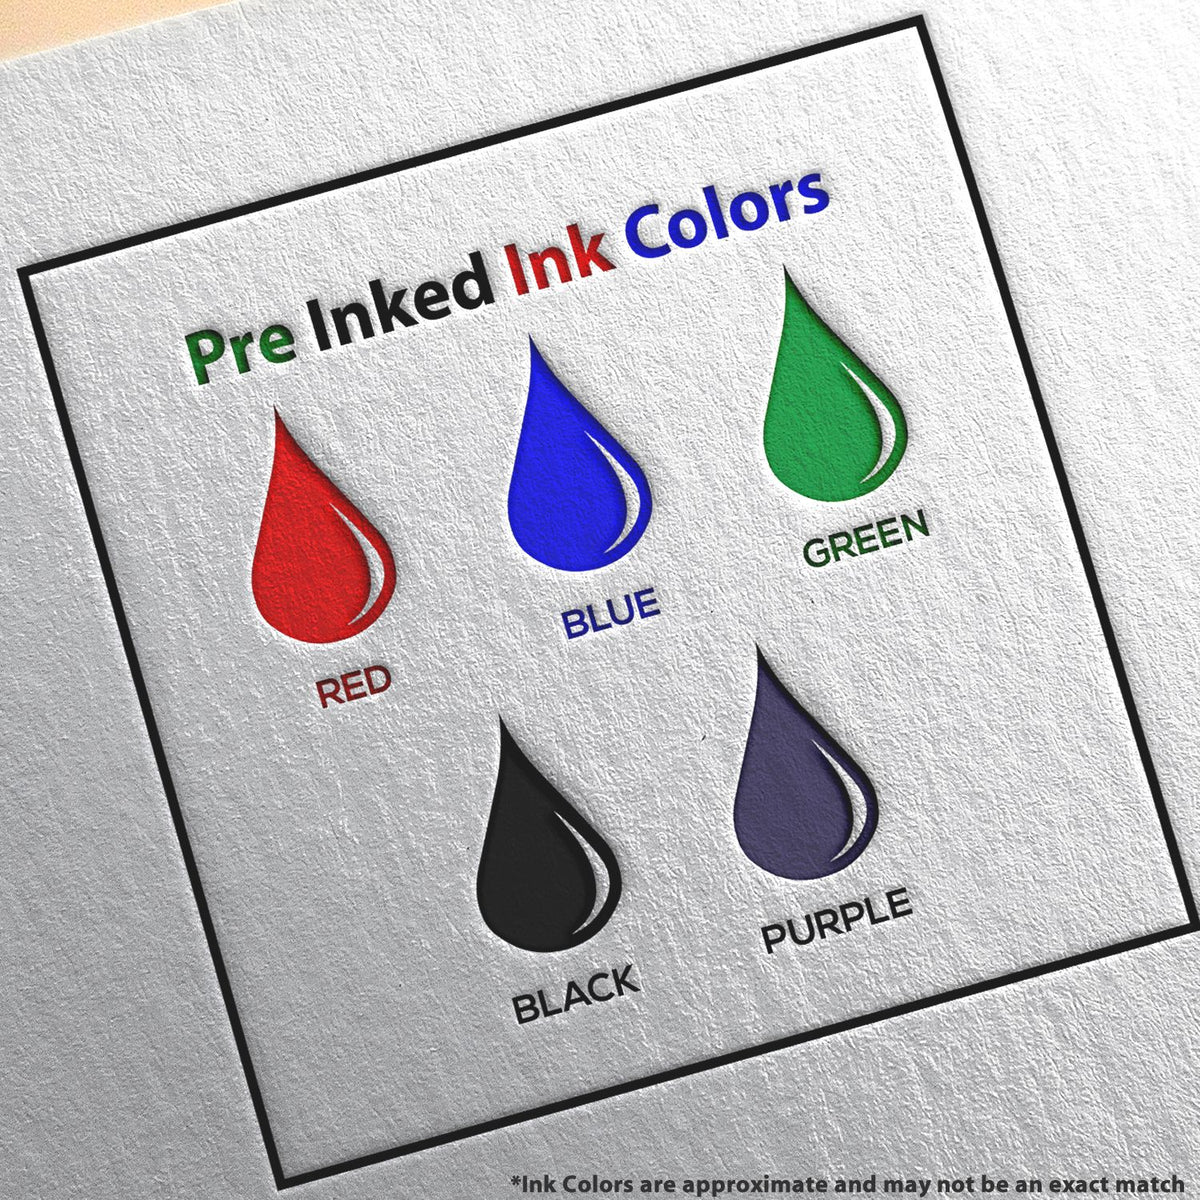 A picture showing the different ink colors or hues available for the PSI Louisiana Notary Stamp product.